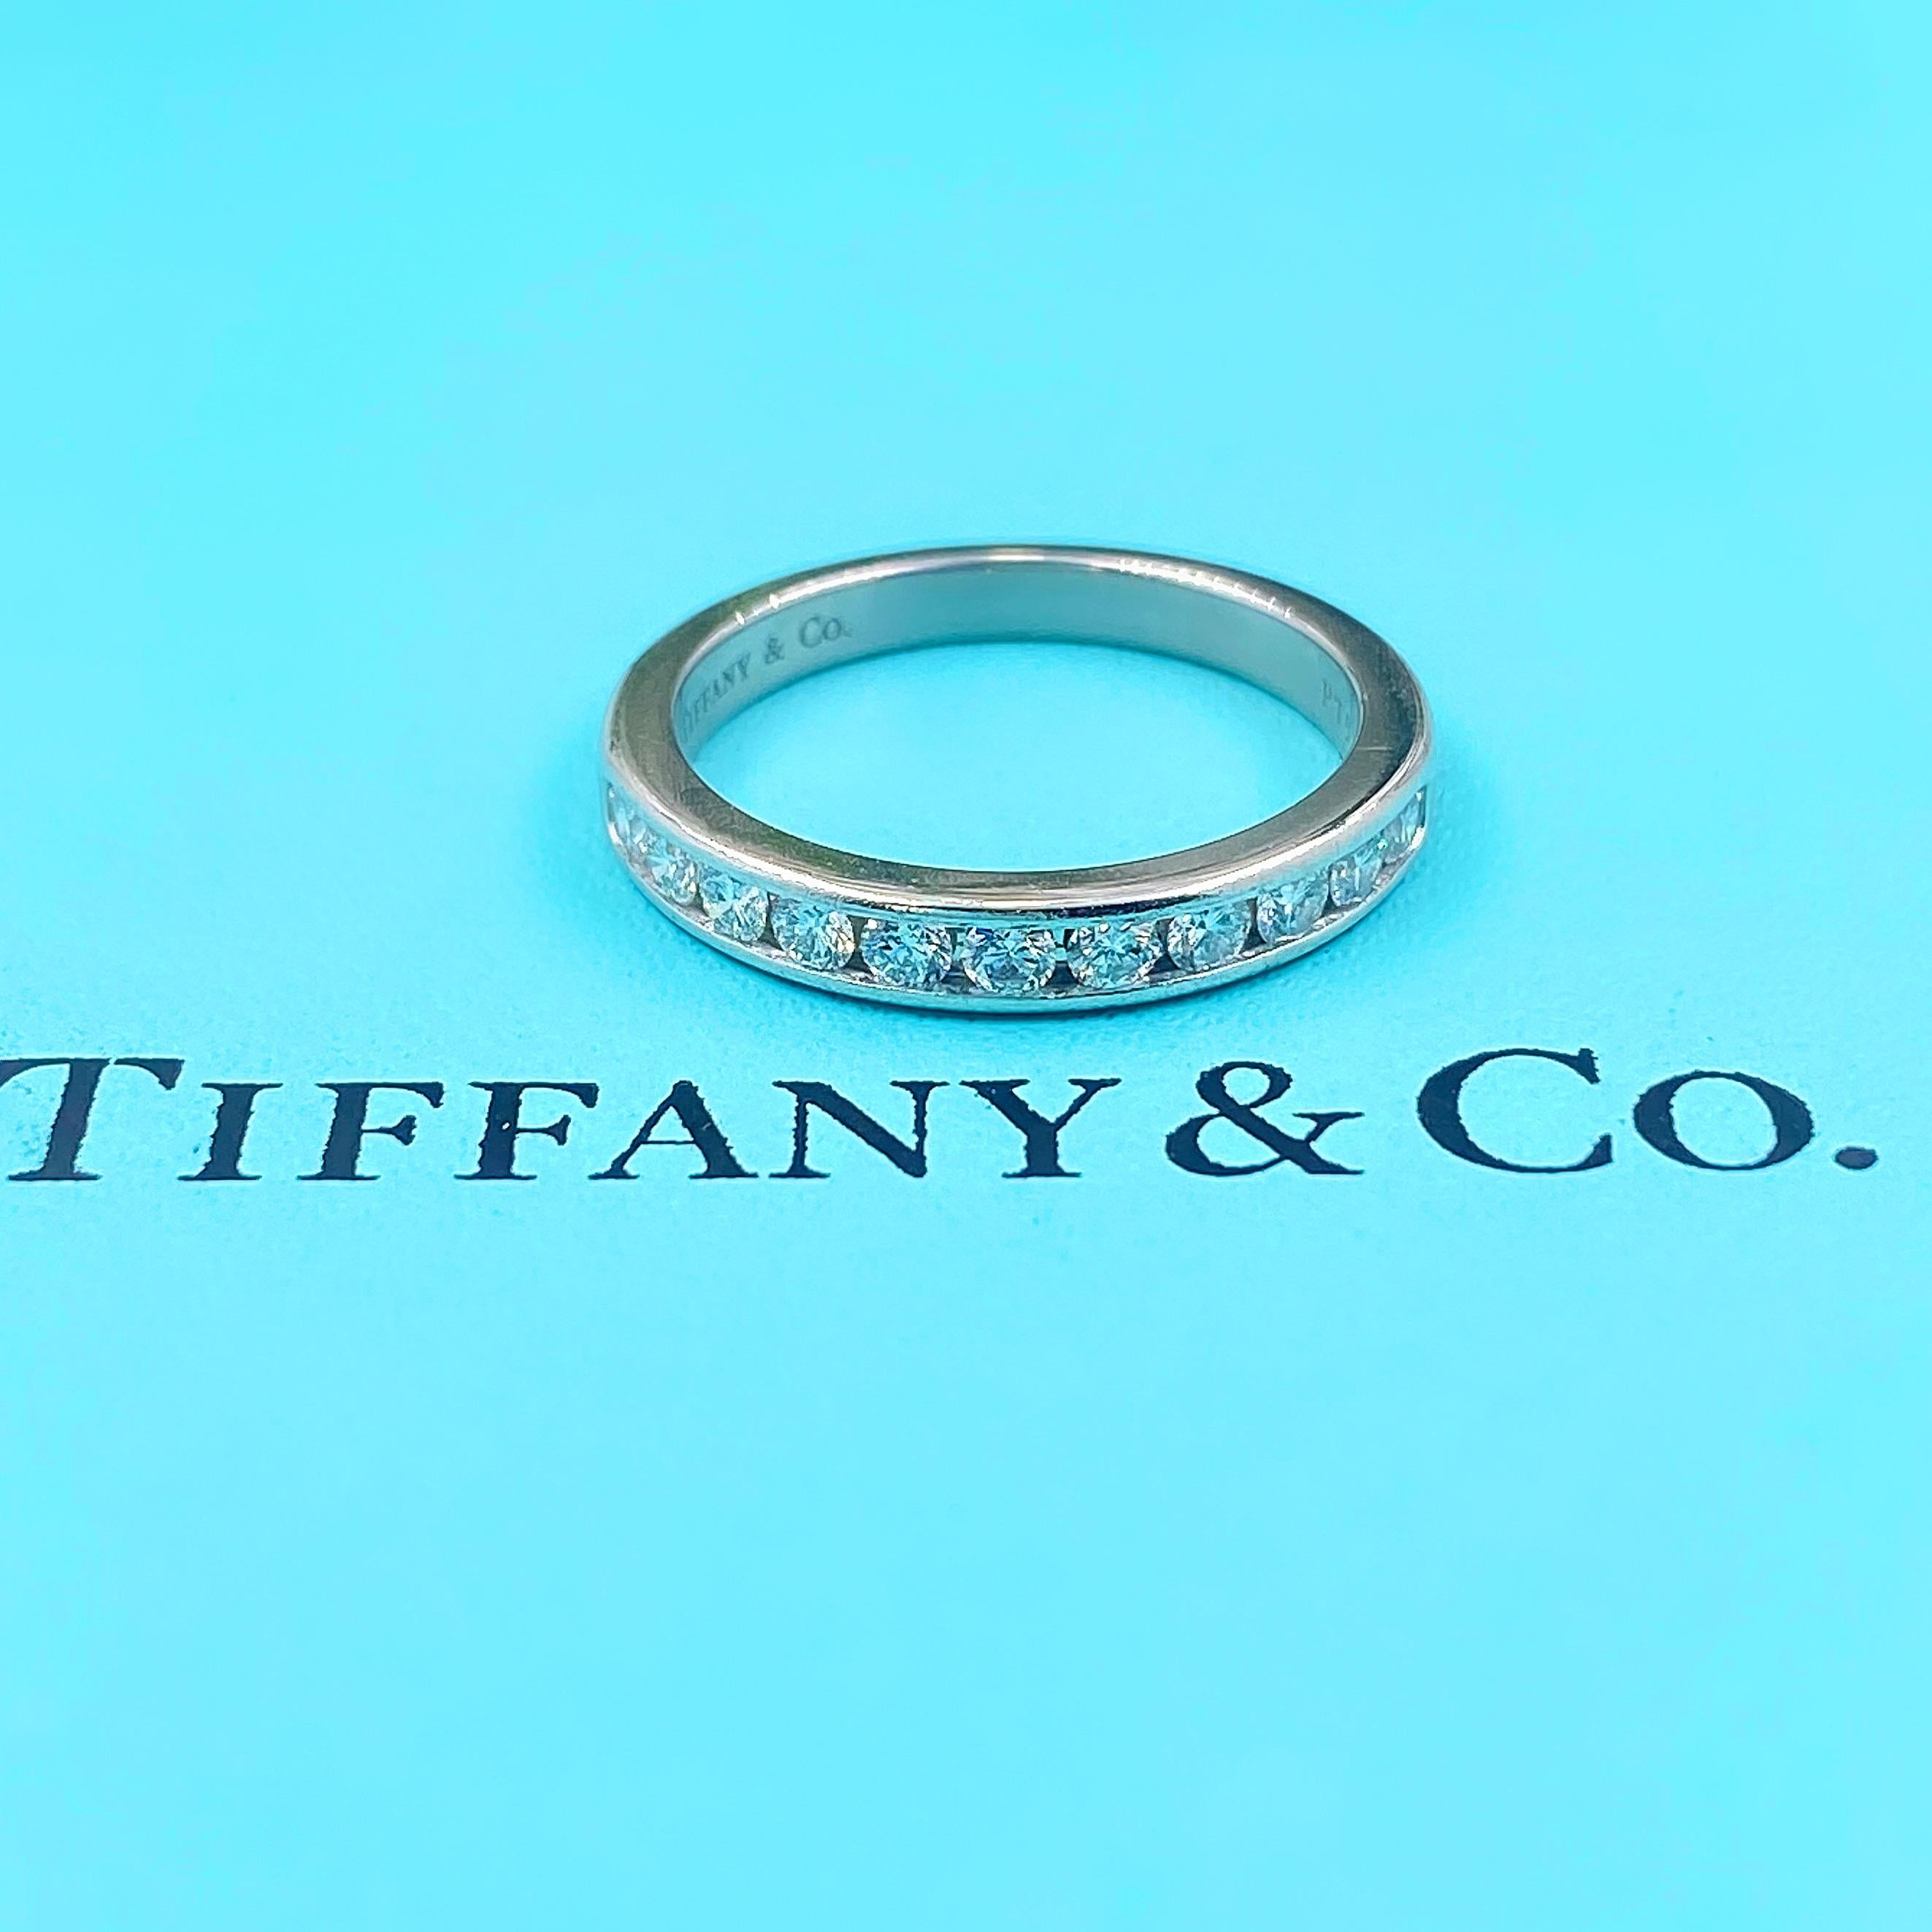 Tiffany & Co Half Circle Round Diamond 0.33 Carat Wedding Band Ring Platinum In Excellent Condition For Sale In San Diego, CA